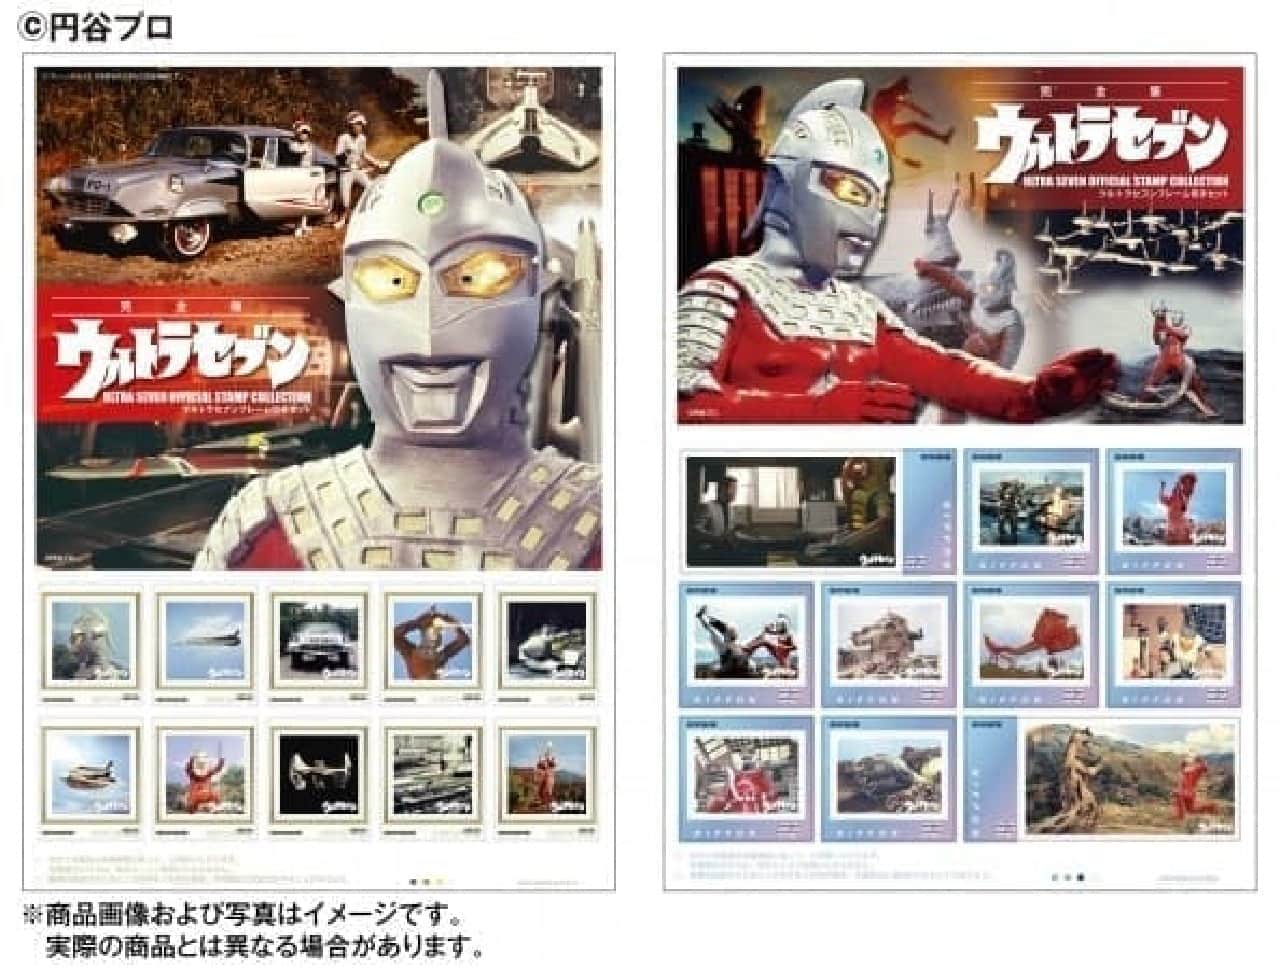 A famous scene revived with stamps